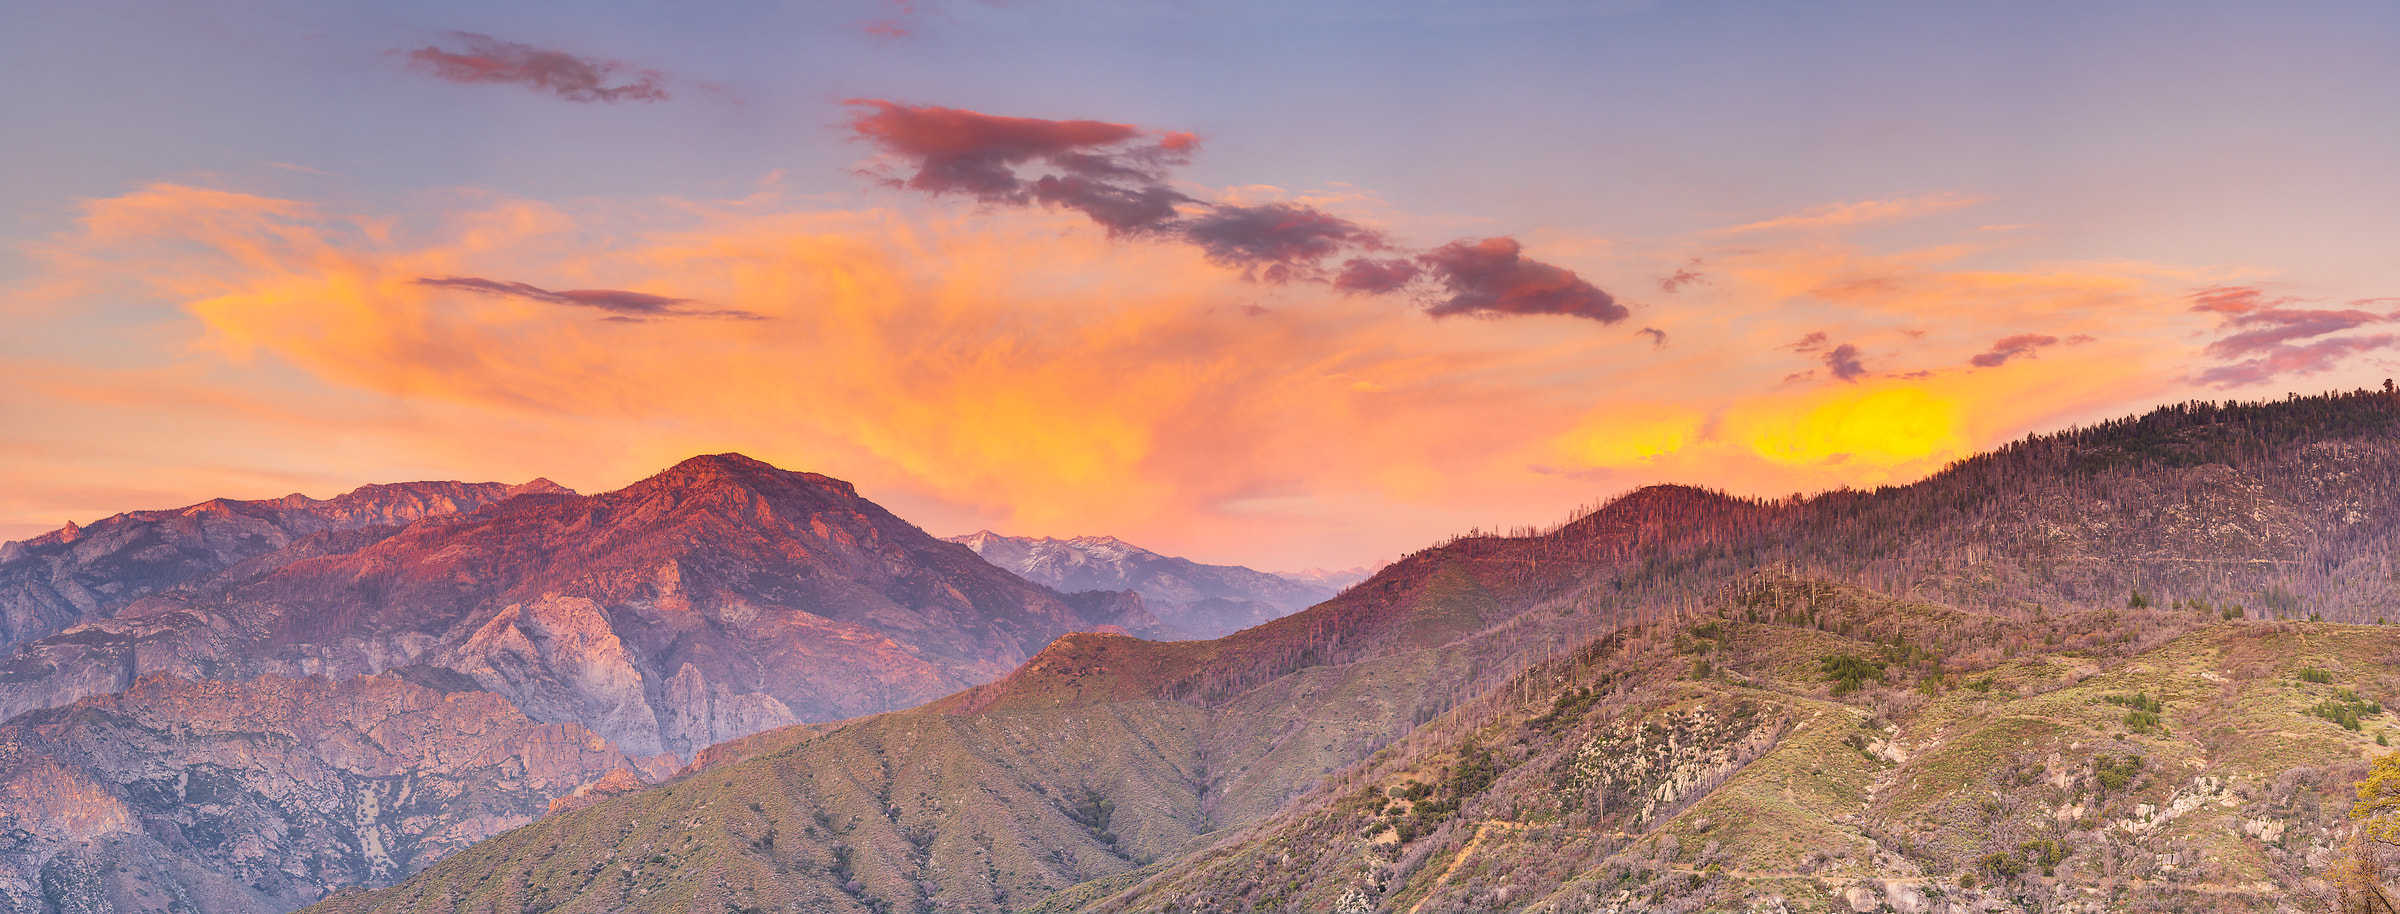 776 megapixels! A very high resolution, large-format VAST photo print of a bright sunset over a landscape; photograph created by Chris Blake in Kings Canyon National Park, California